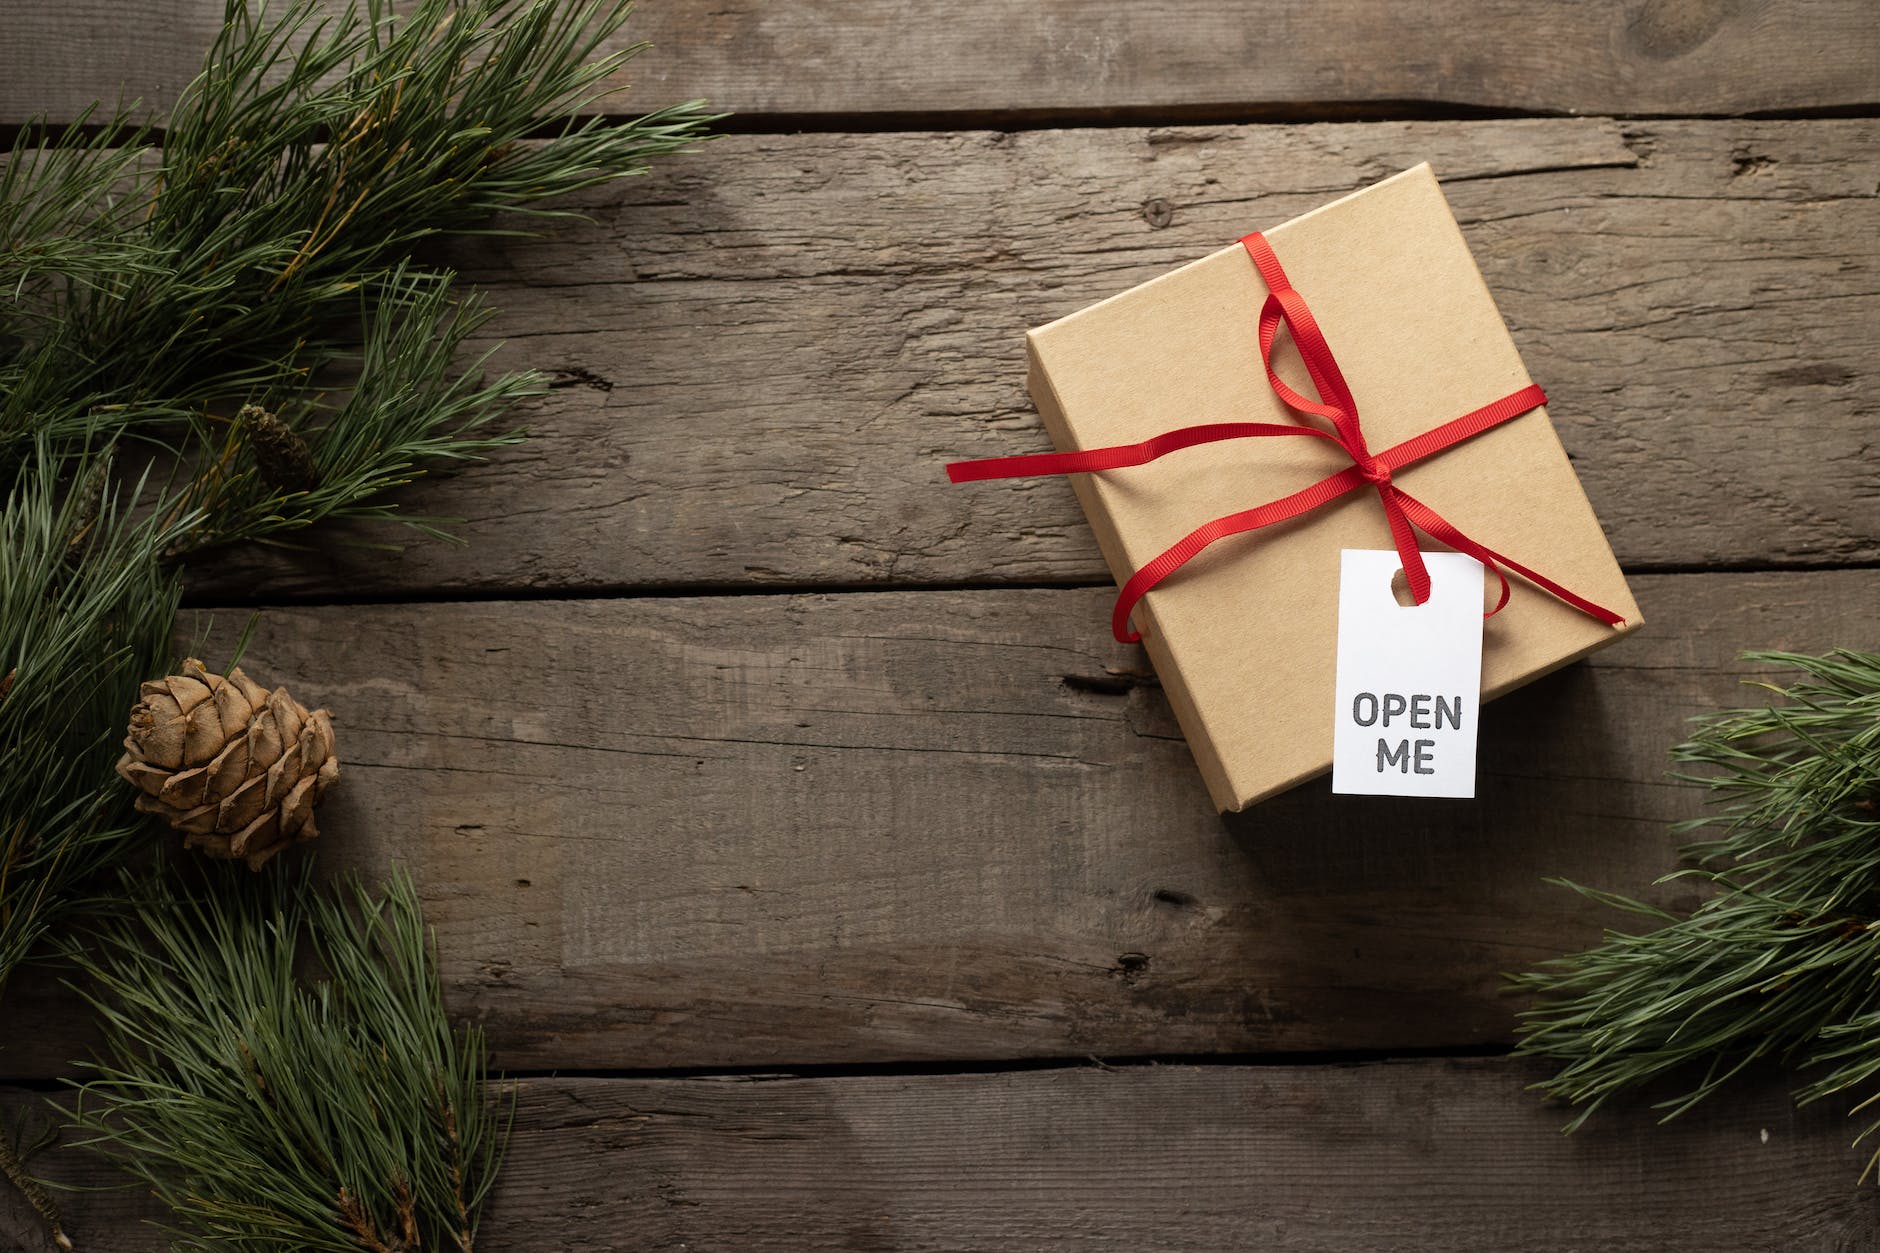 Eco-Friendly gift guide